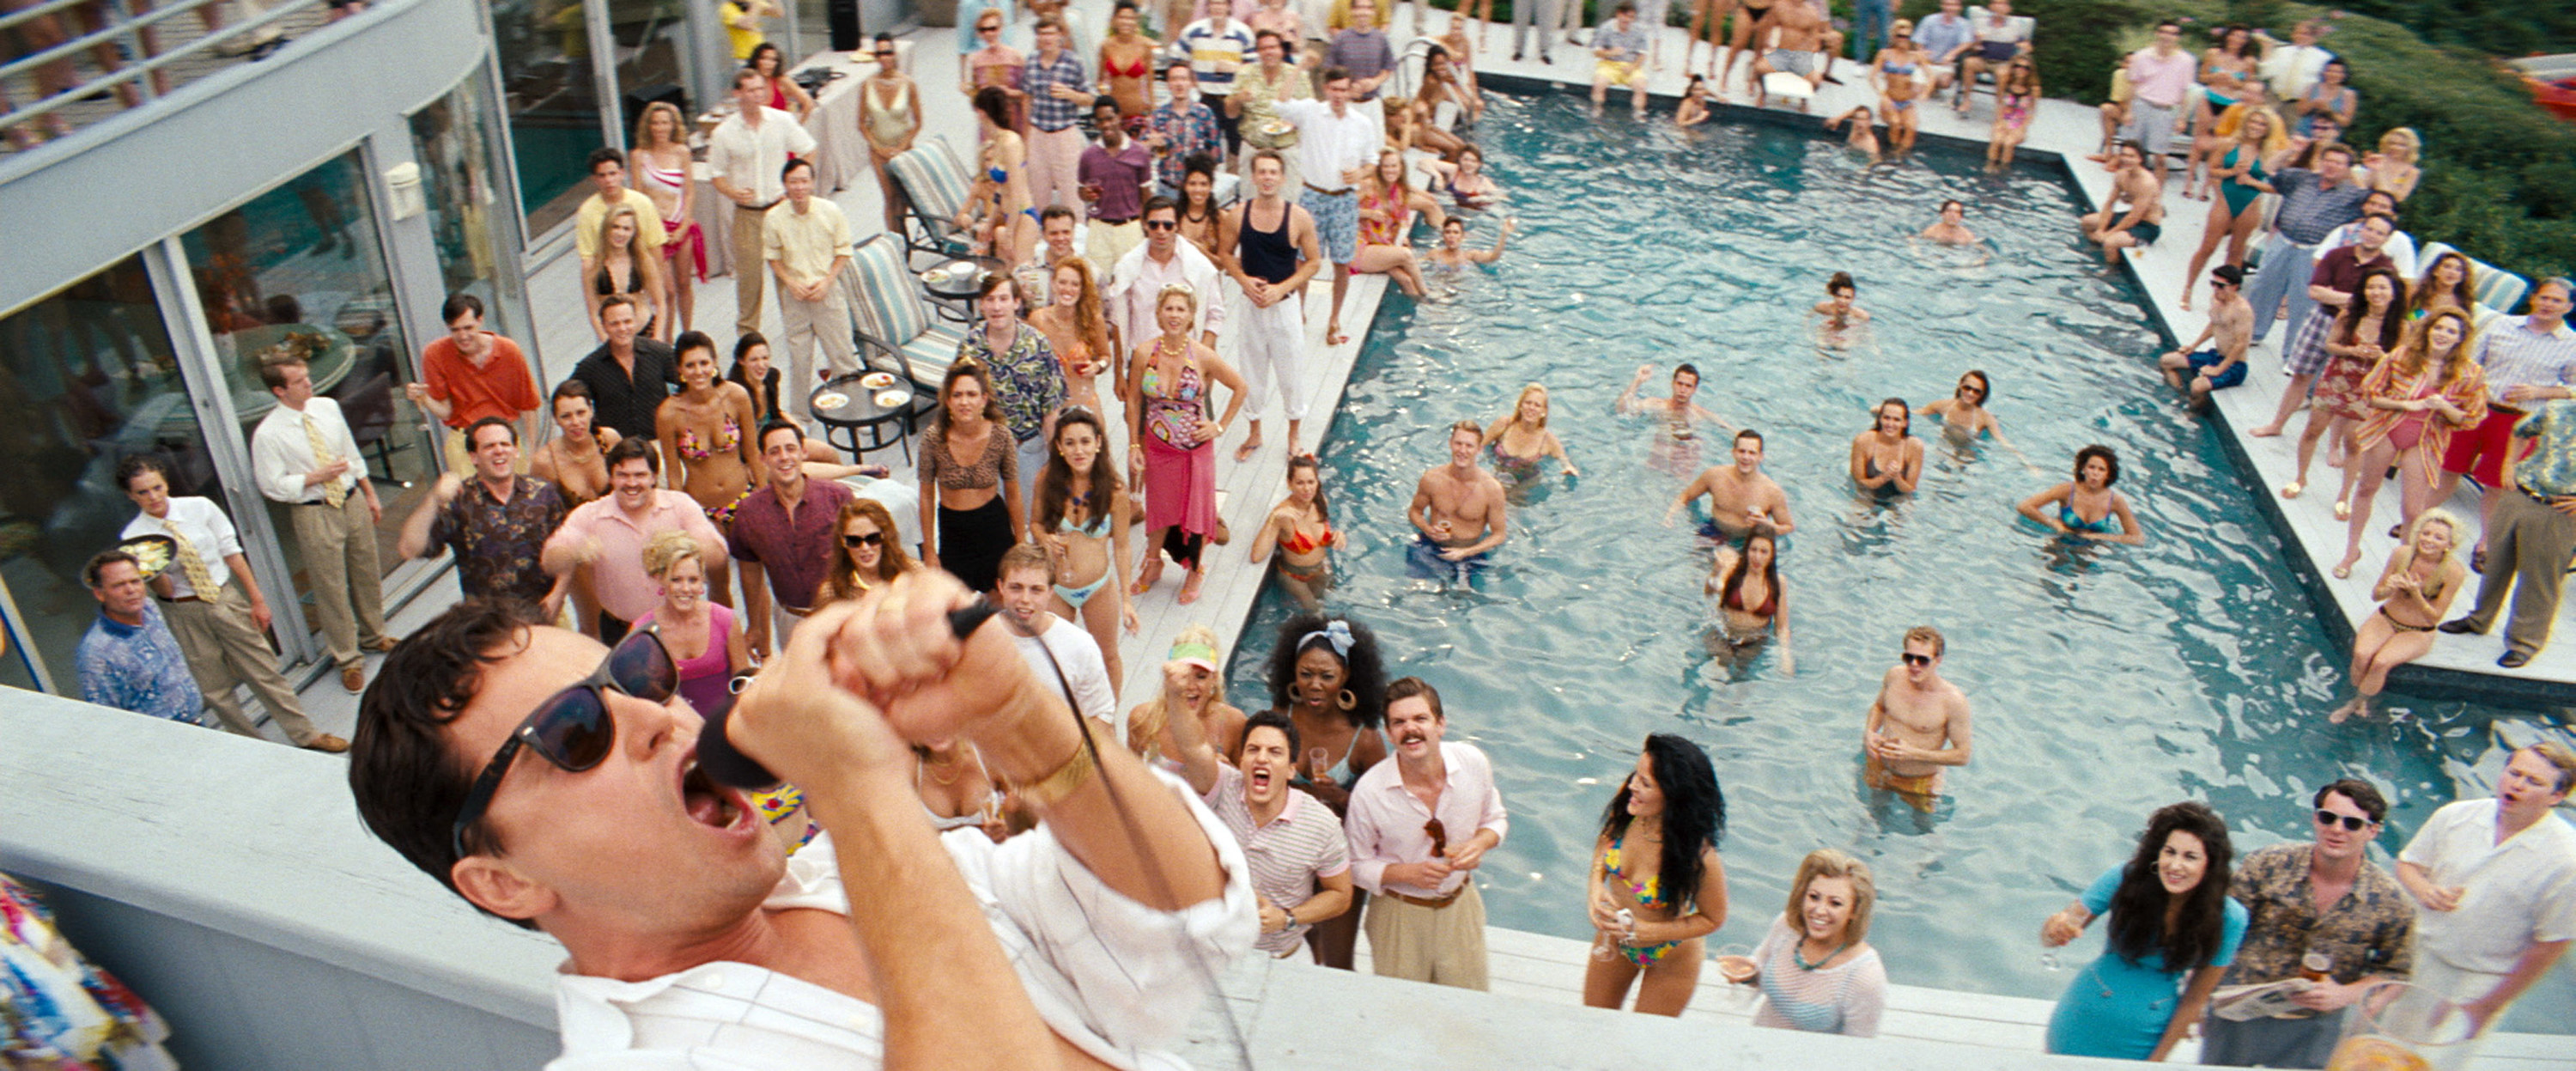 Leonardo DiCaprio shouts into a microphone above a pool party